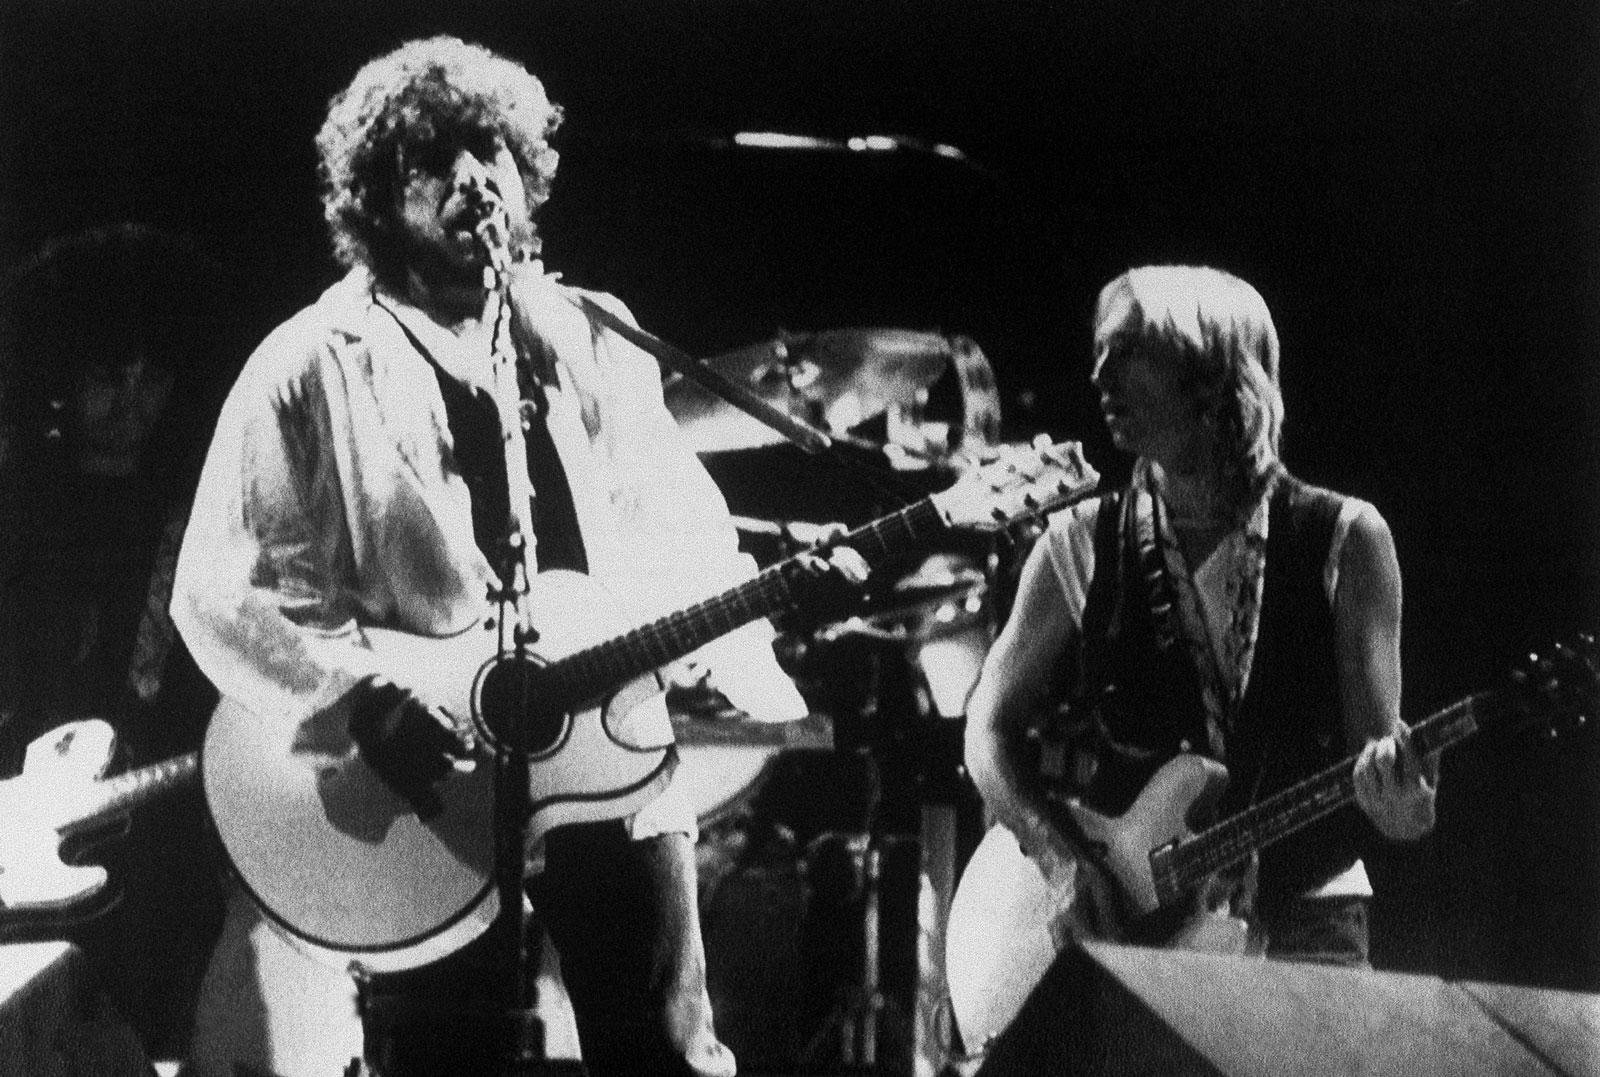 Bob Dylan performing with Tom Petty in Modena, Italy September 13, 1987